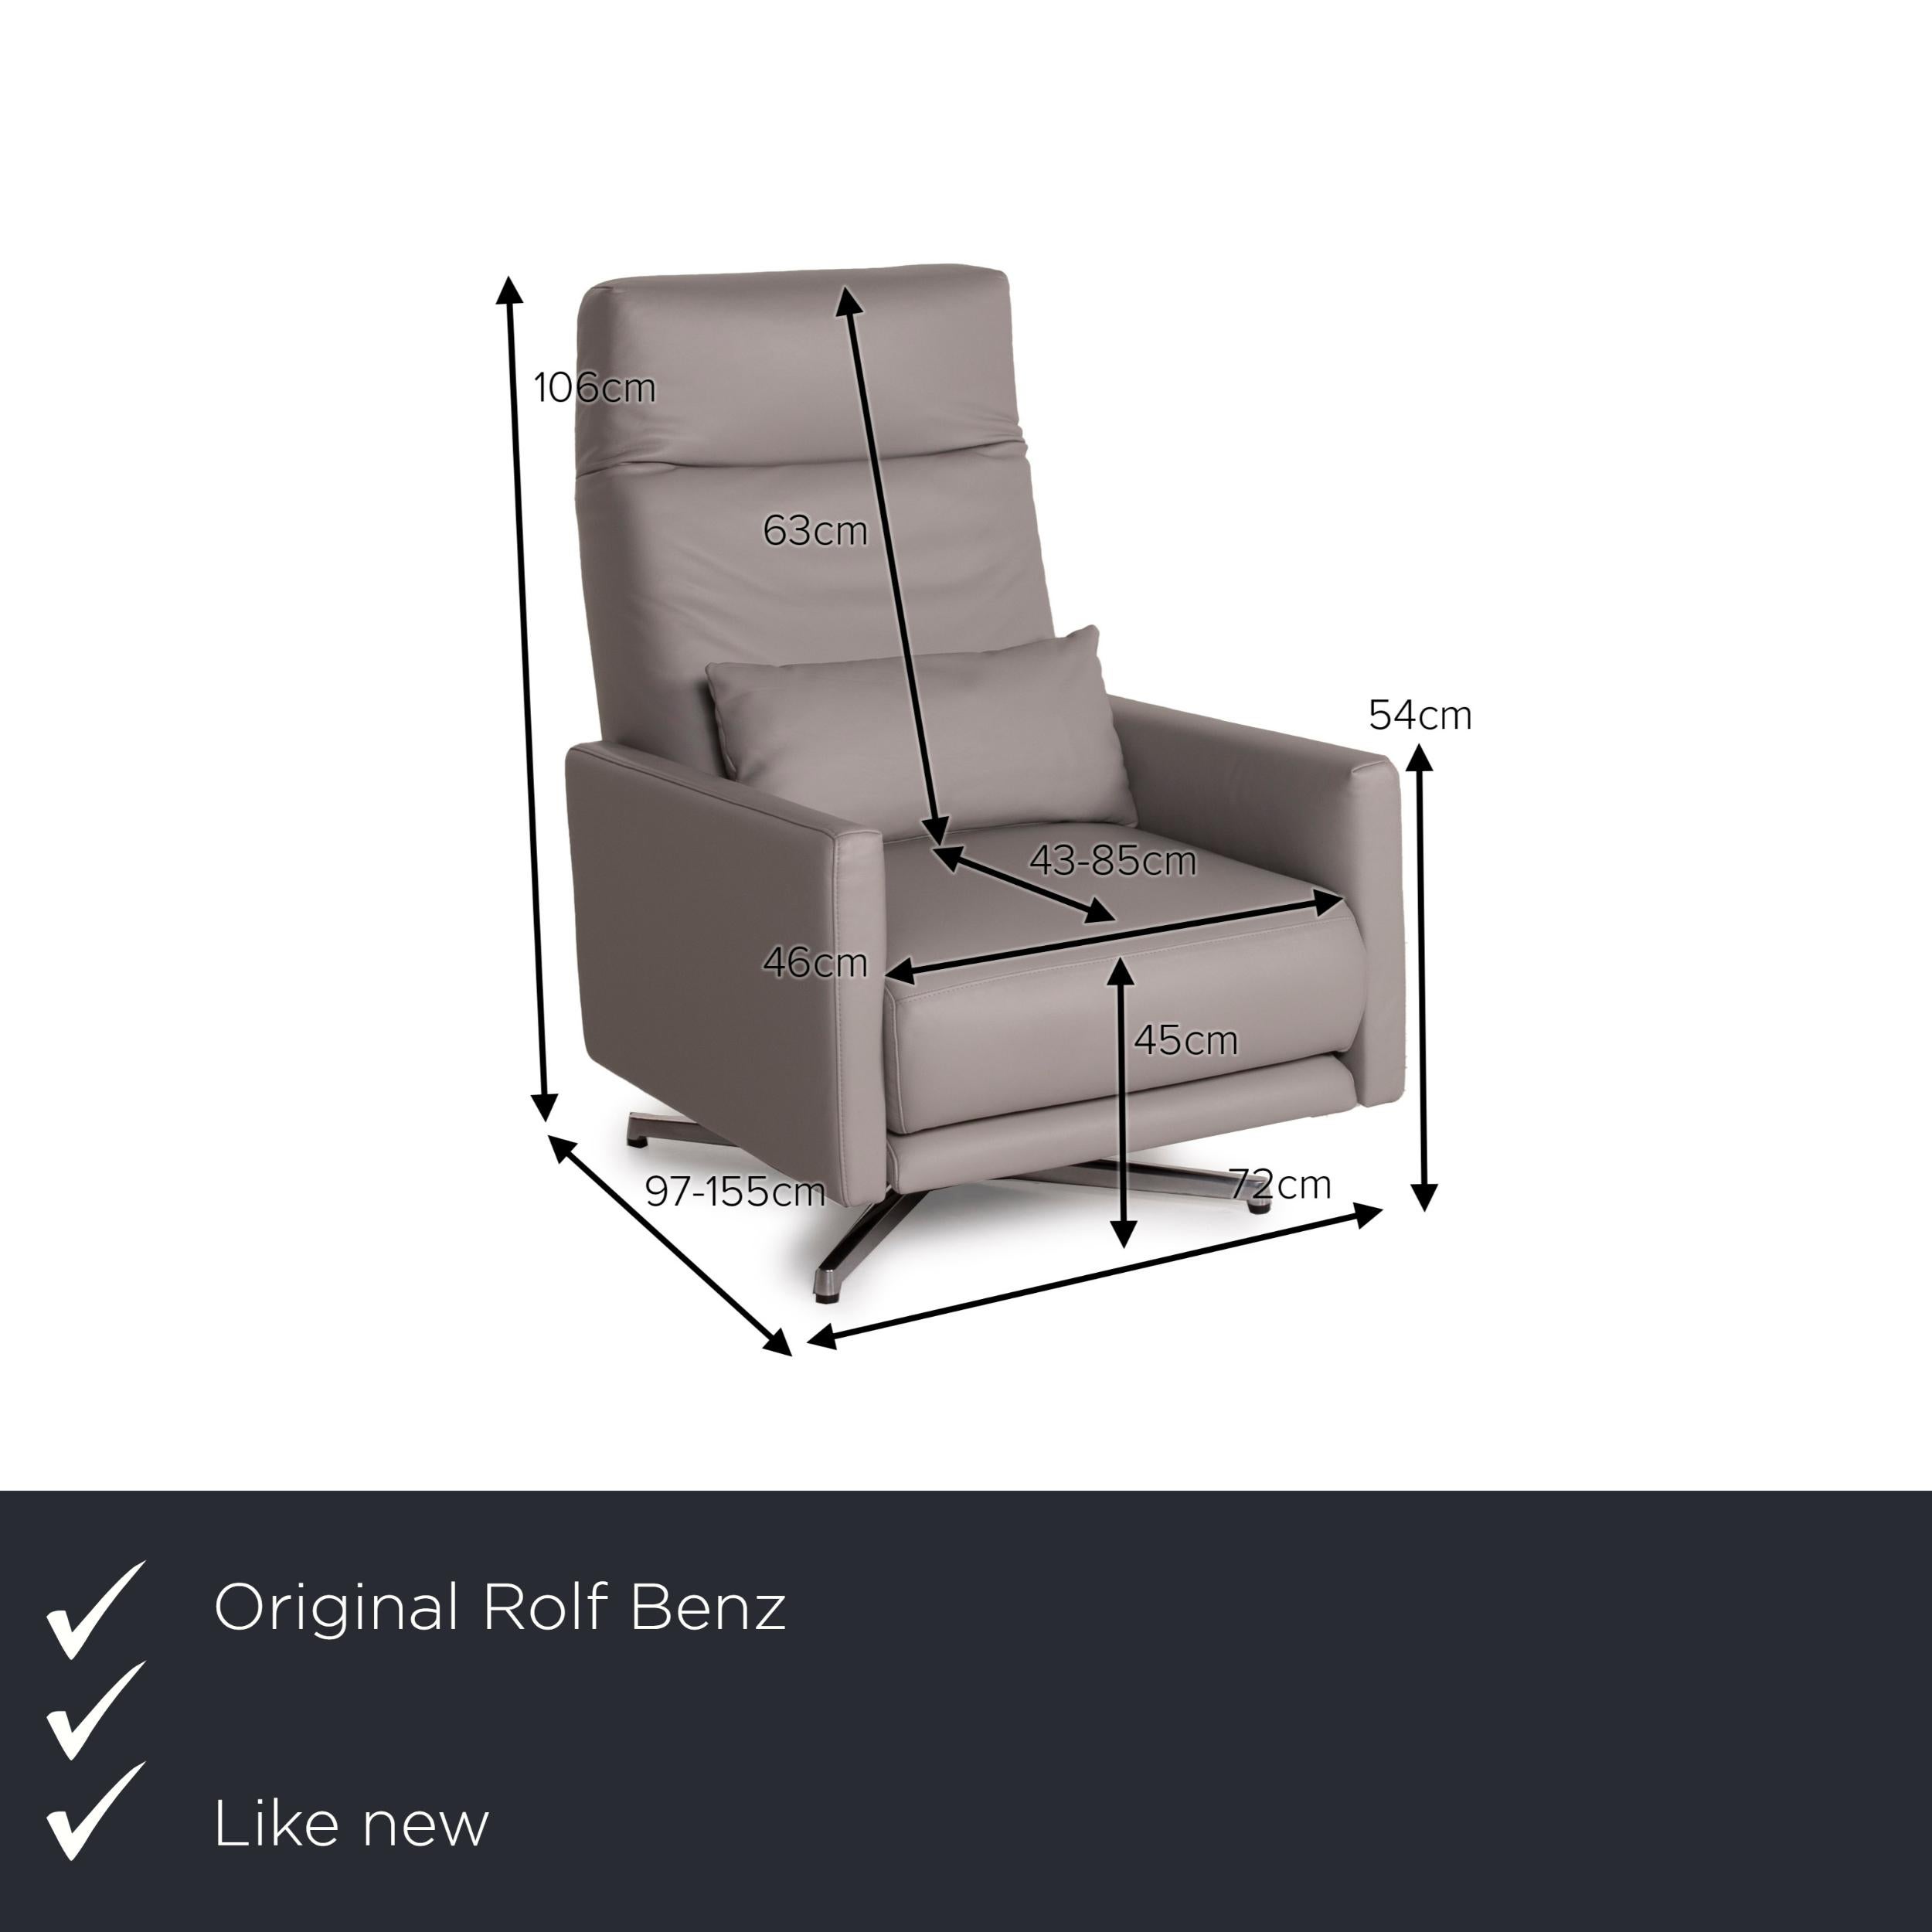 We present to you a Rolf Benz 574 leather armchair gray relax function.


 Product measurements in centimeters:
 

Depth: 97
Width: 72
Height: 106
Seat height: 45
Rest height: 54
Seat depth: 43
Seat width: 46
Back height: 63.

 